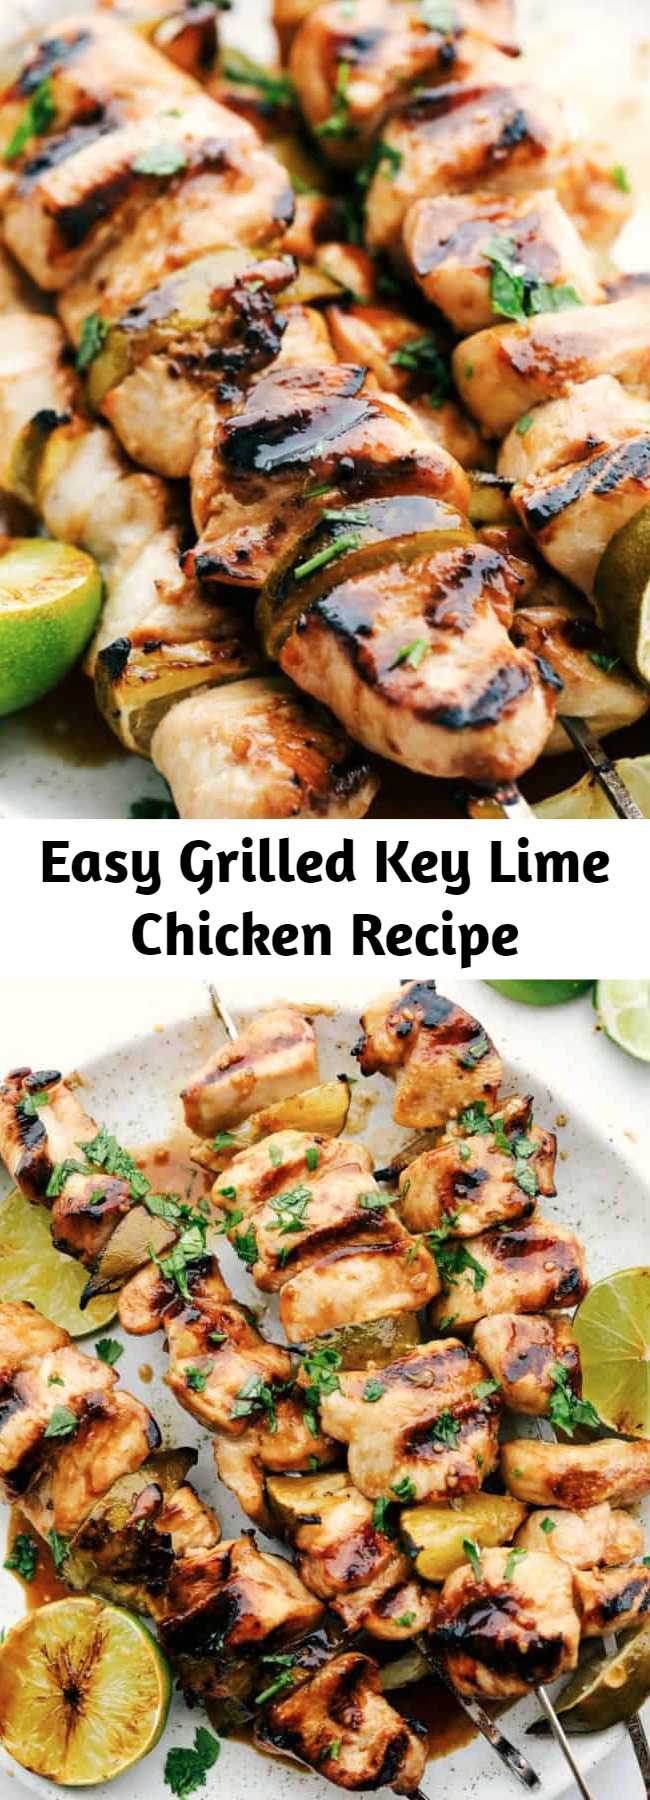 Easy Grilled Key Lime Chicken Recipe - If you're using bamboo skewers, soak your sticks in water for at least 5 minutes. Cut chicken into large chunks, and skewer. Allow to marinate for at least 1 hour. I am pretty sure your family will love this key lime chicken too!